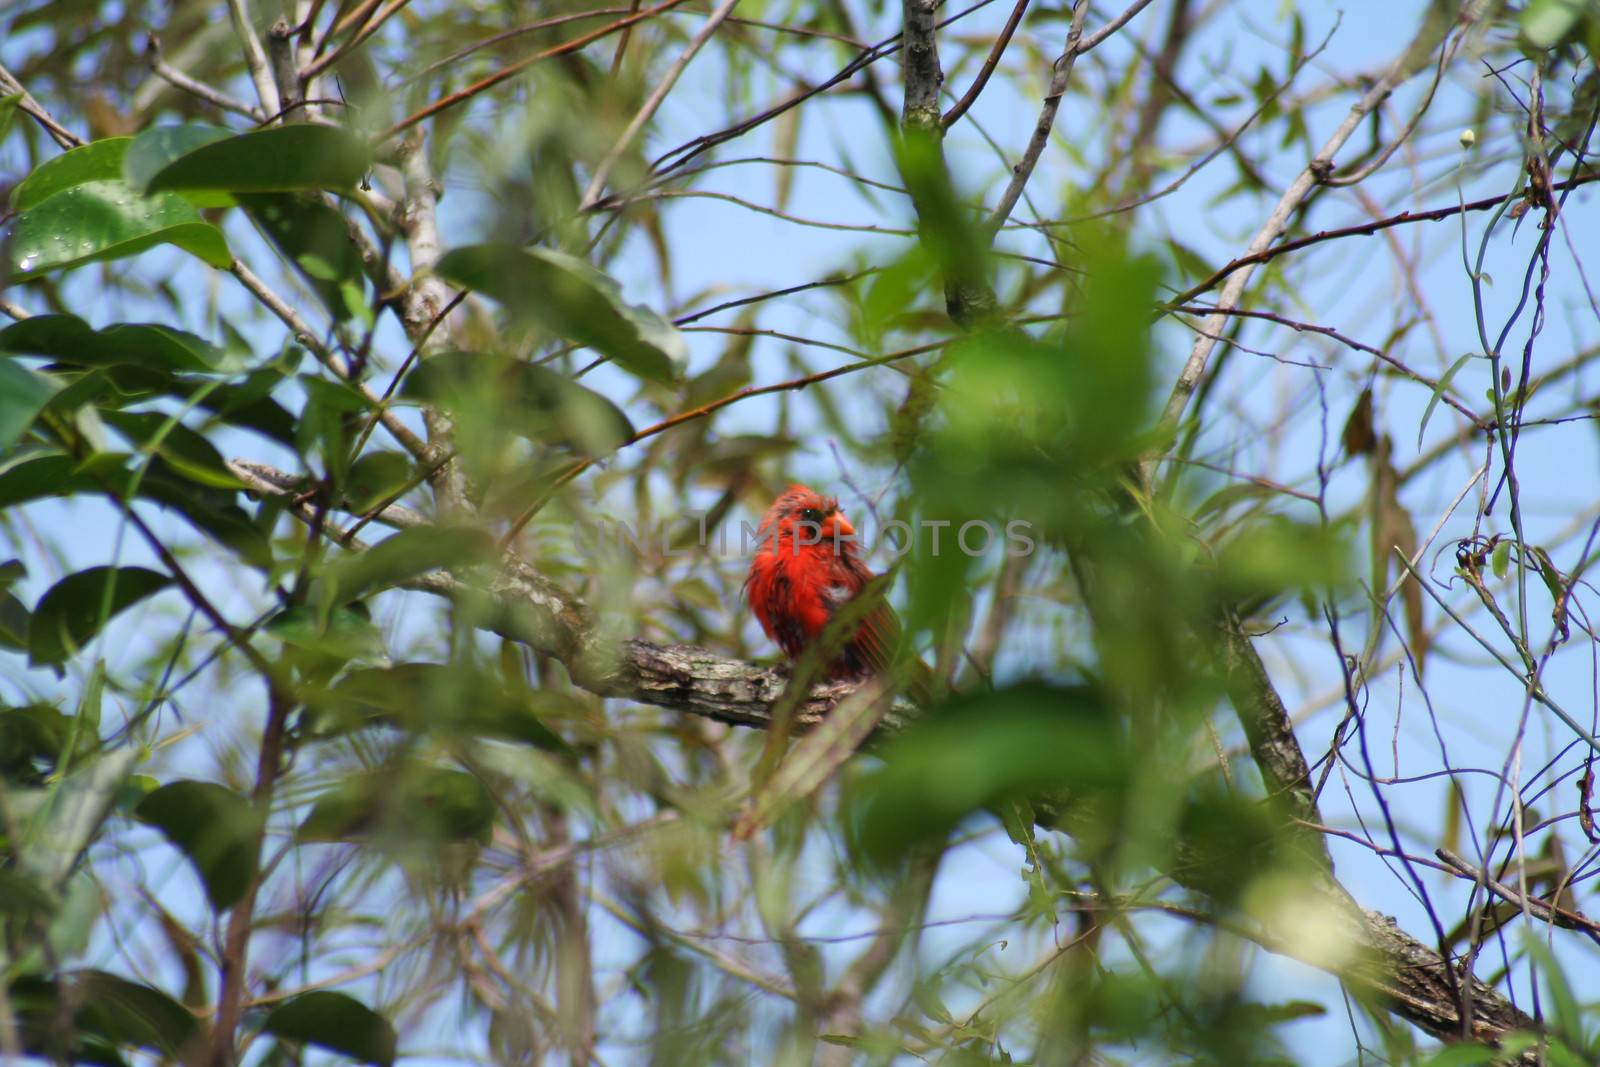 Low angle view of a red bird perching on a branch, Everglades National Park, Florida, USA